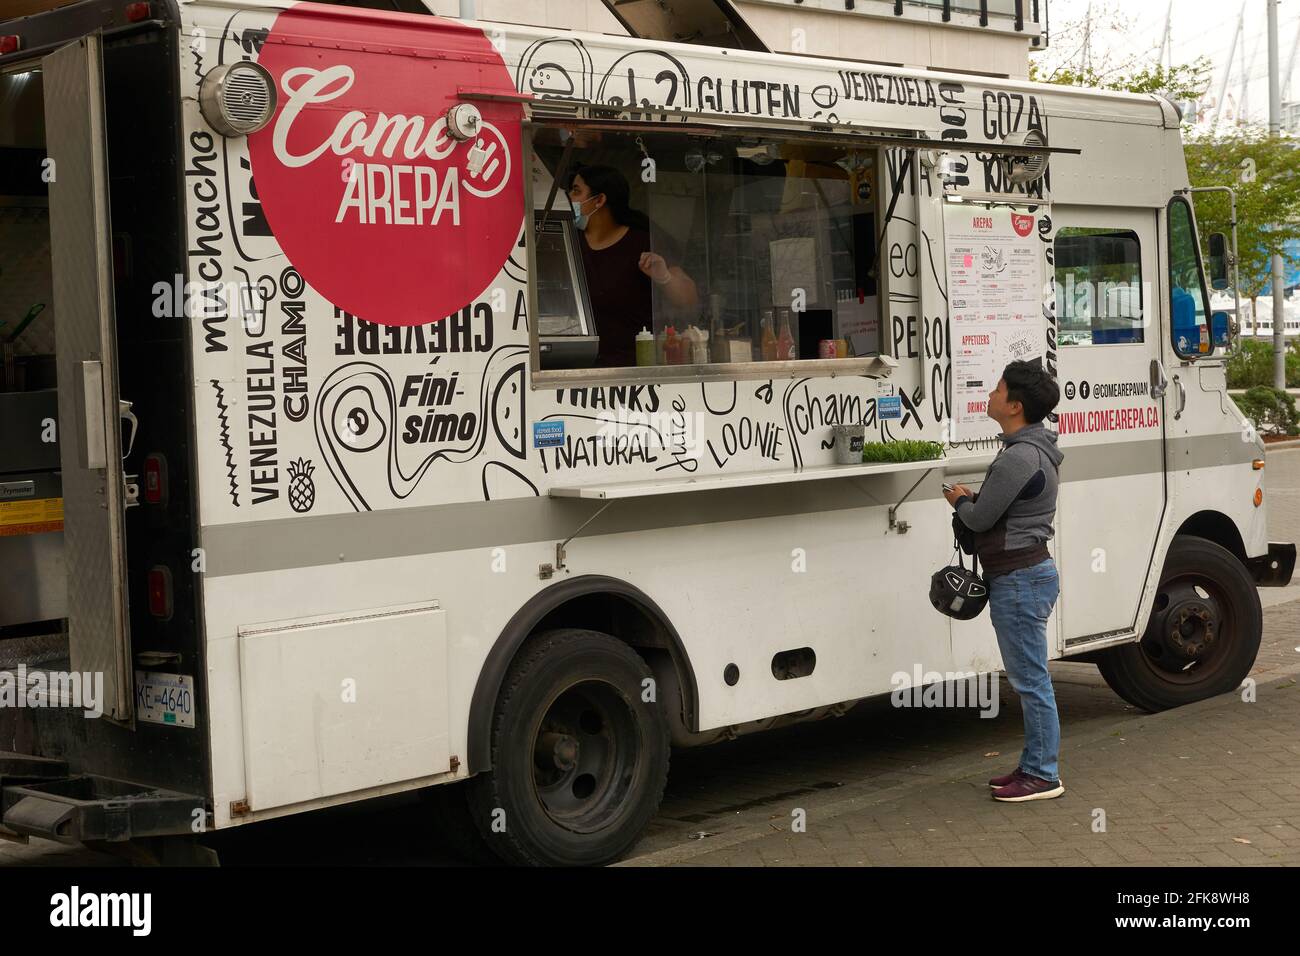 Woman ordering Venezuelan arepas from a food truck in Vancouver, British Columbia, Canada Stock Photo